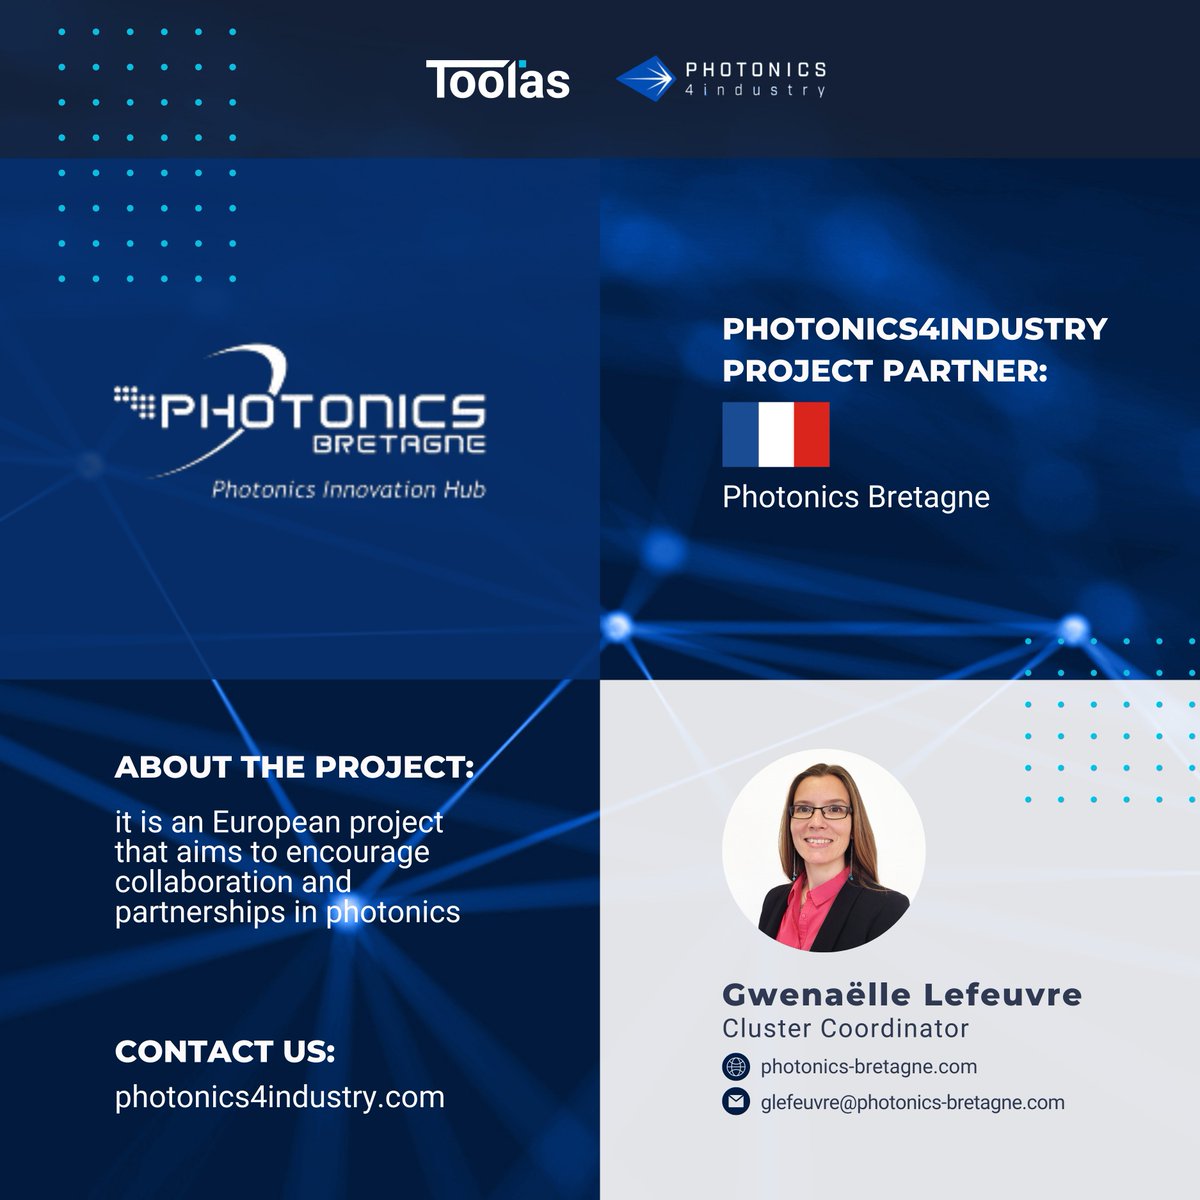 @ToolasCluster partners: 3/4 - Photonics Bretagne @BzhP is dedicated to driving #photonics integration across various sectors, with a focus on the agrifood industry. They offer a range of cluster services and are an important part of the @Photonics4I project!